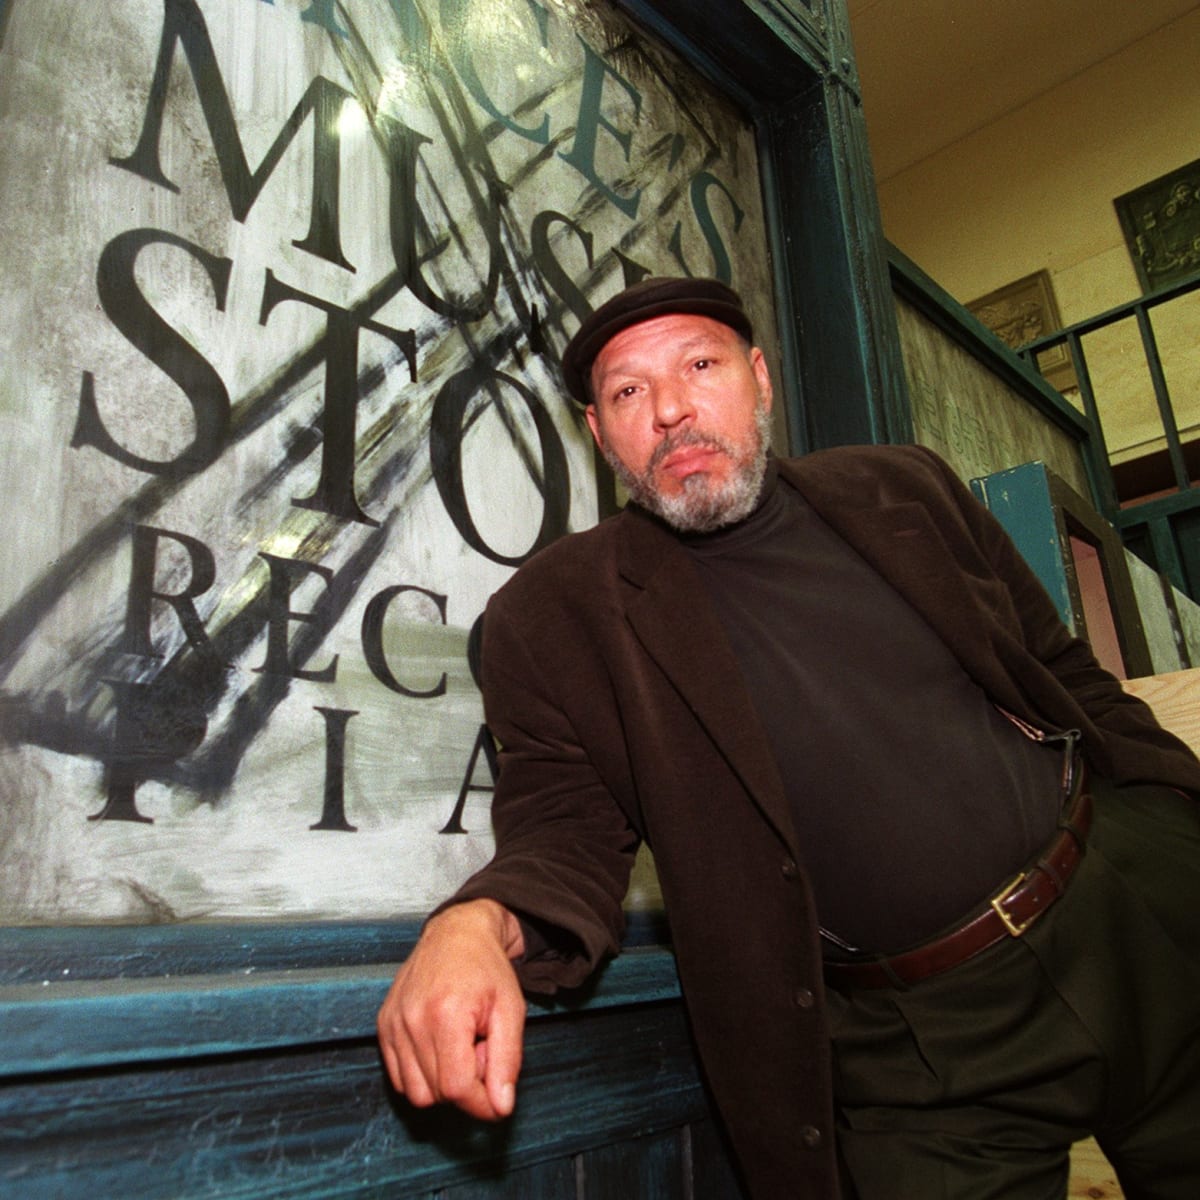 August Wilson posing in front of artwork, Barry Chin, The Boston Globe